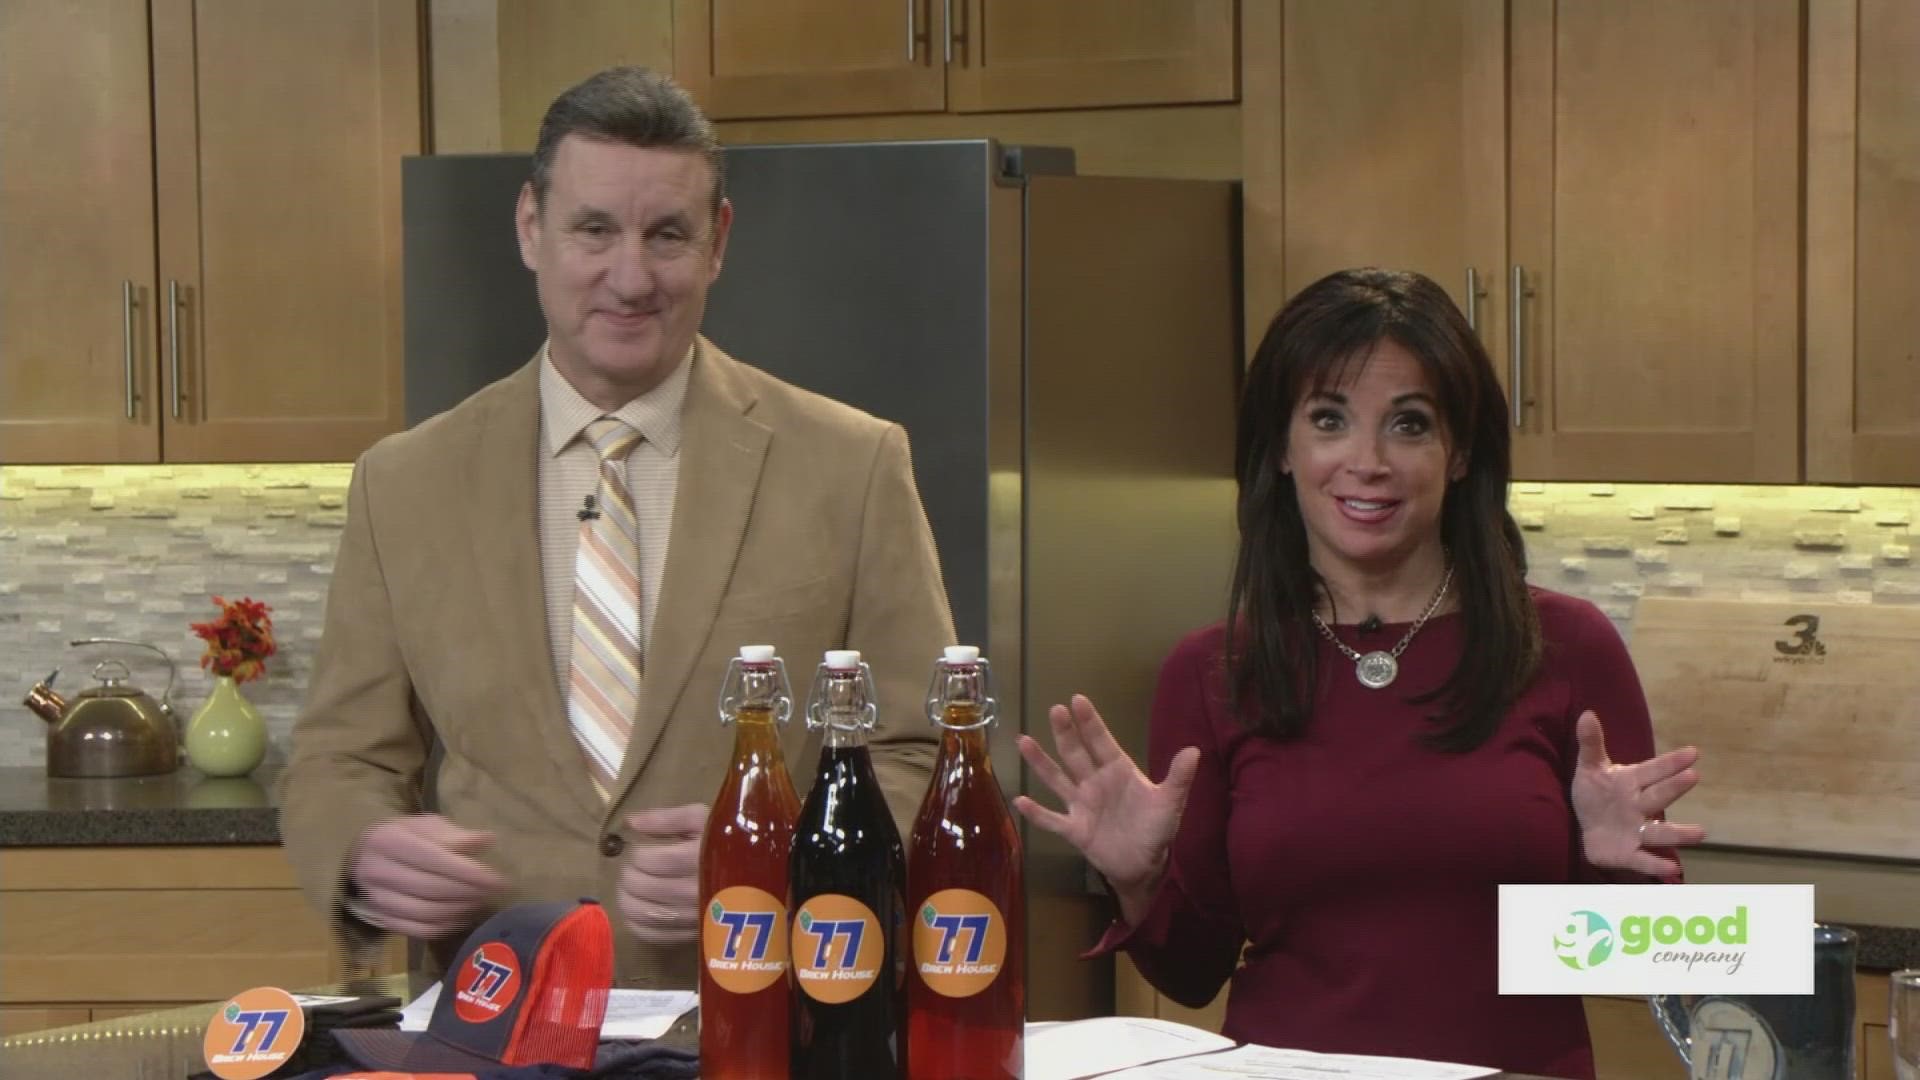 Joe and Hollie talk with Marshall from 77 Brew House about their signature drinks, including one that helps benefit Save22, a nonprofit that helps veterans.